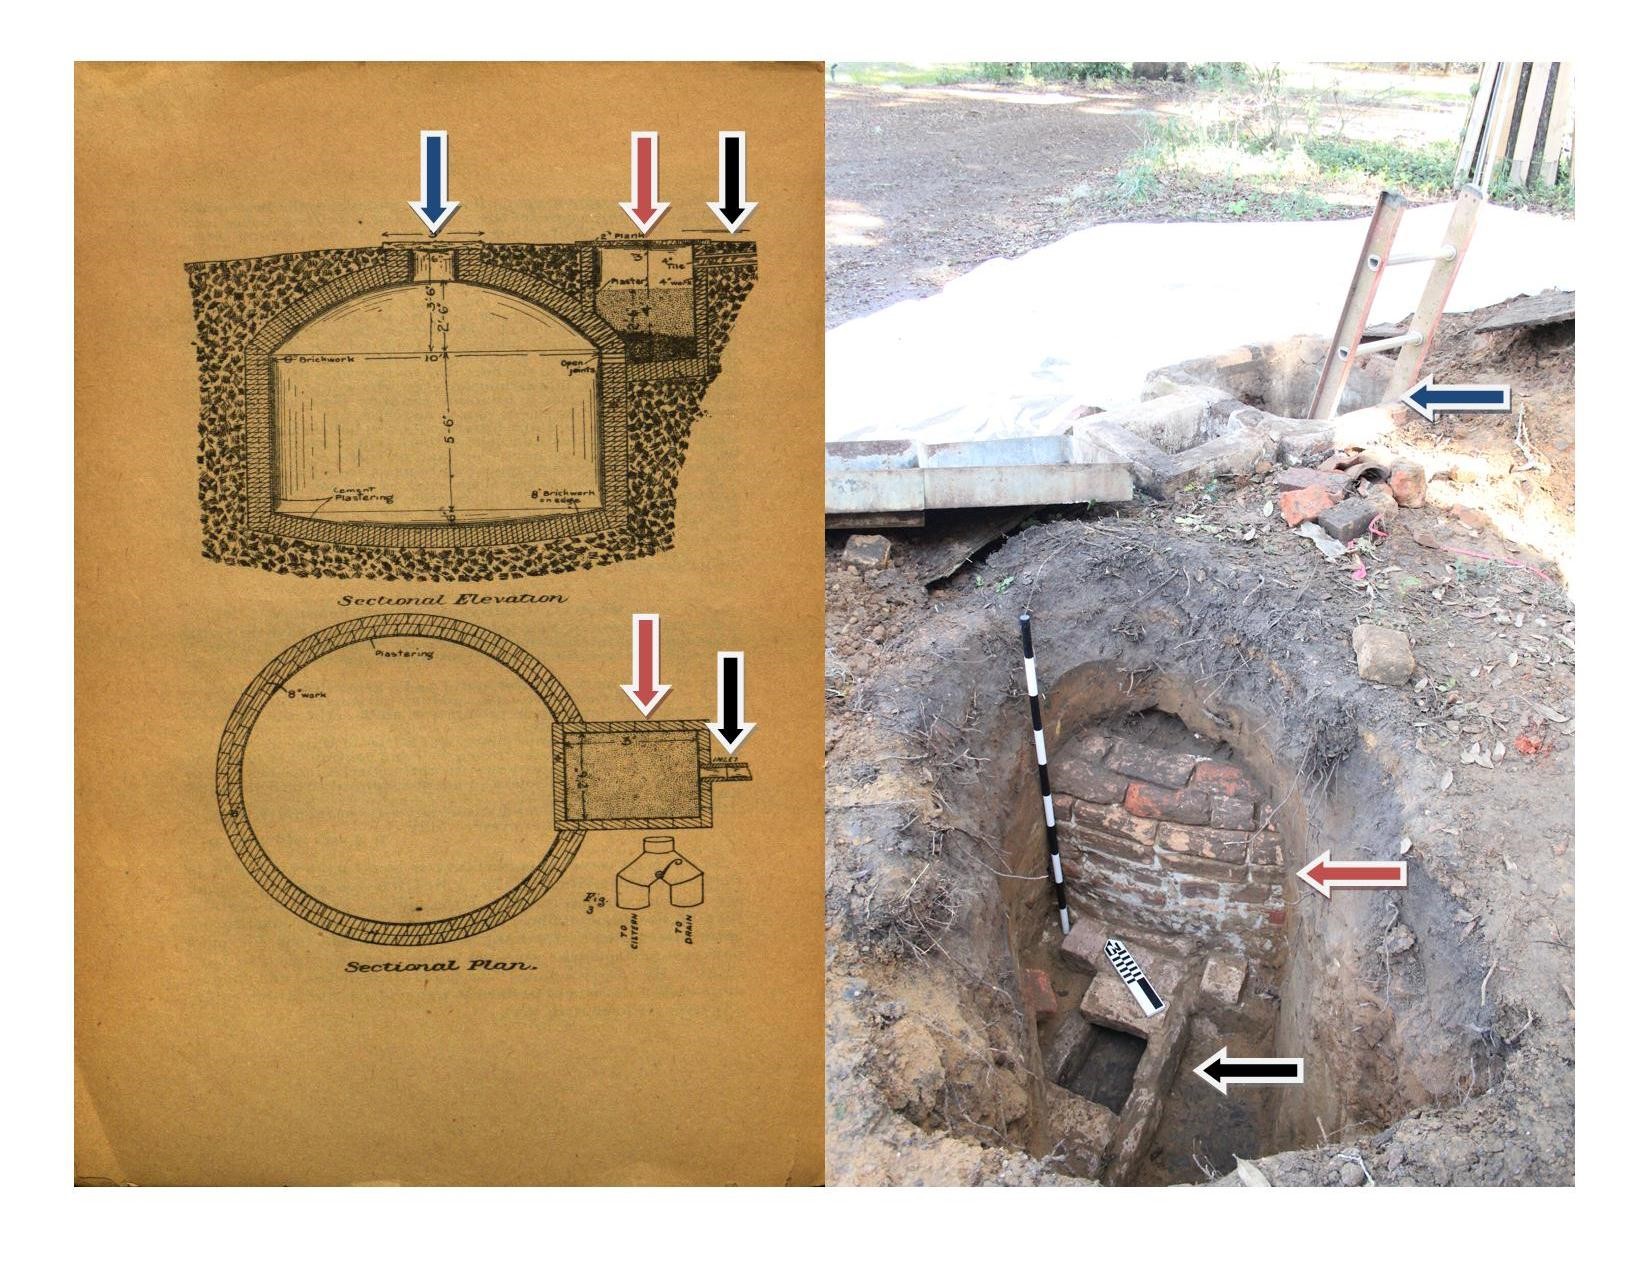 Diagram of a typical 19th century cistern (left). Photograph of the cistern during excavation (right). Note that the arrows on the two images indicate the filtration box and the top opening of the cistern (TGAR).